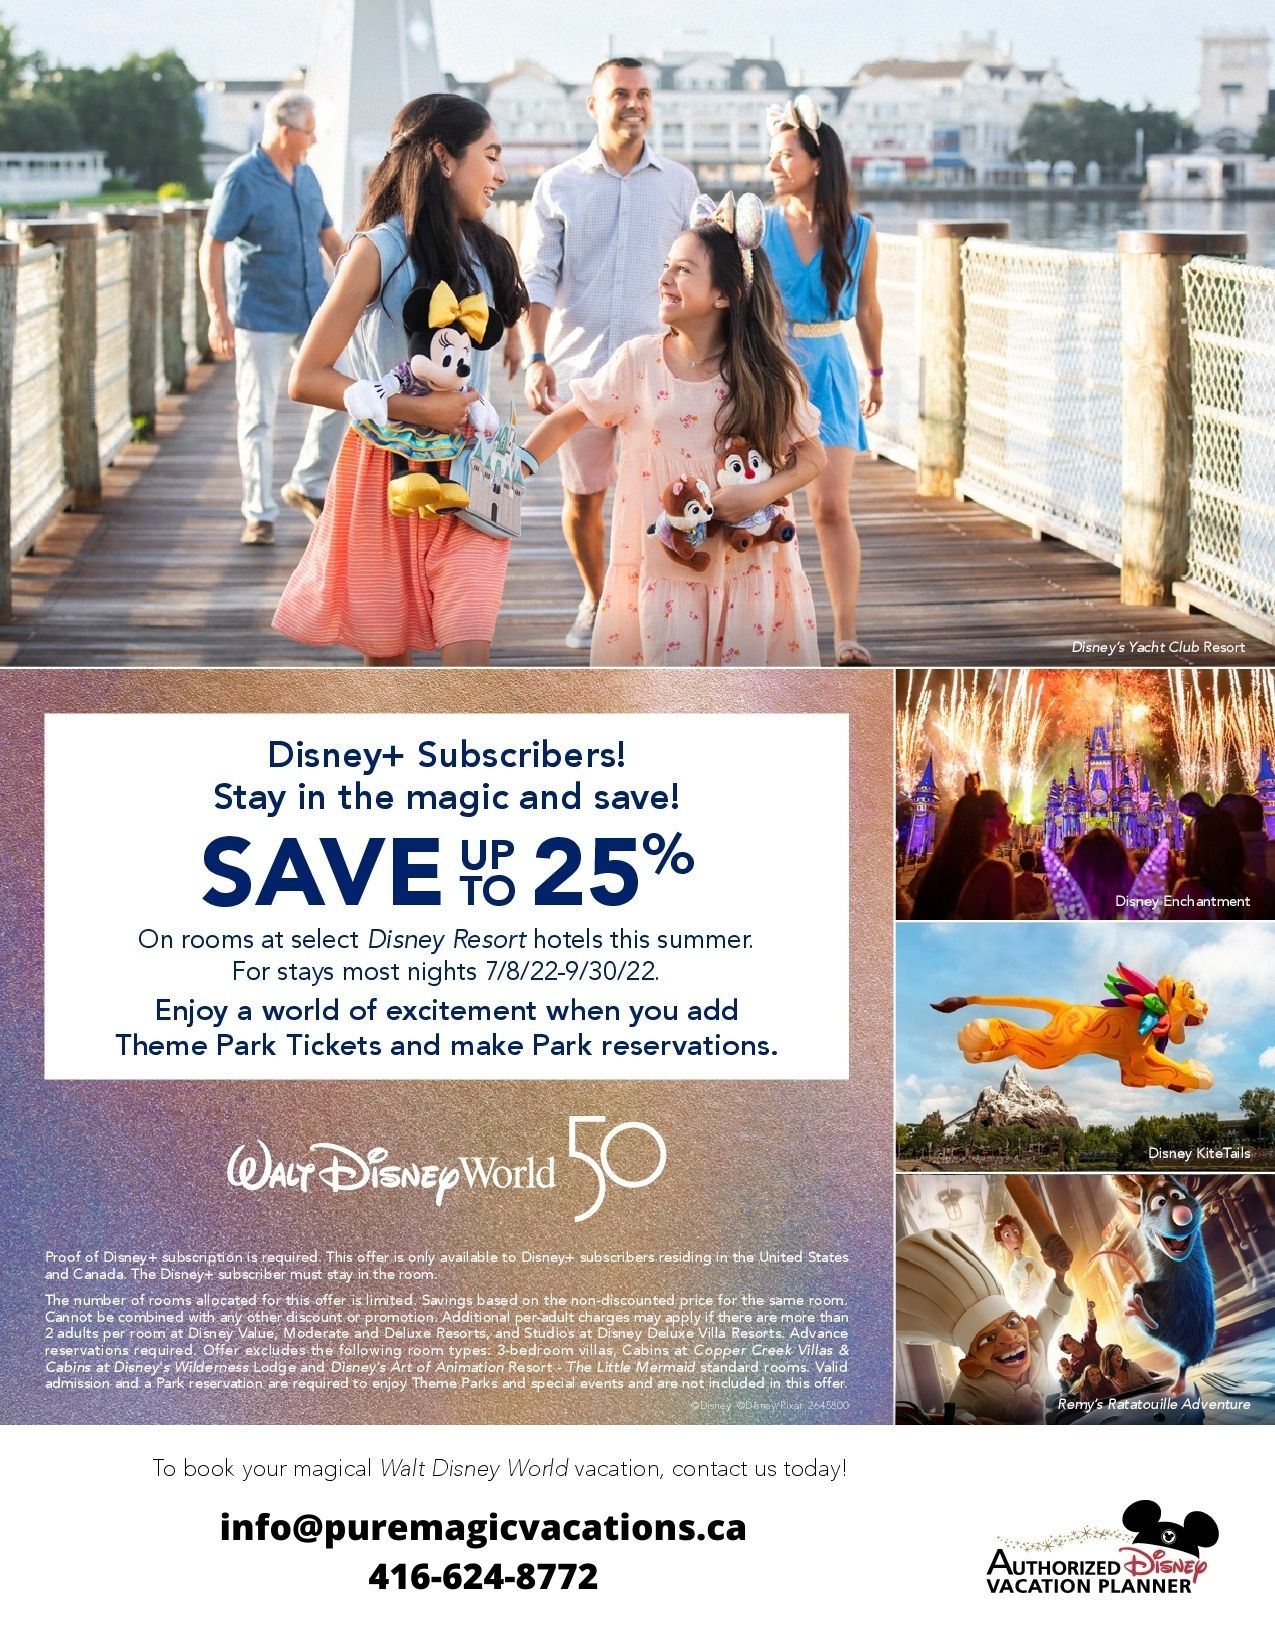 Disney+ Subscribers! Stay in the magic and save!